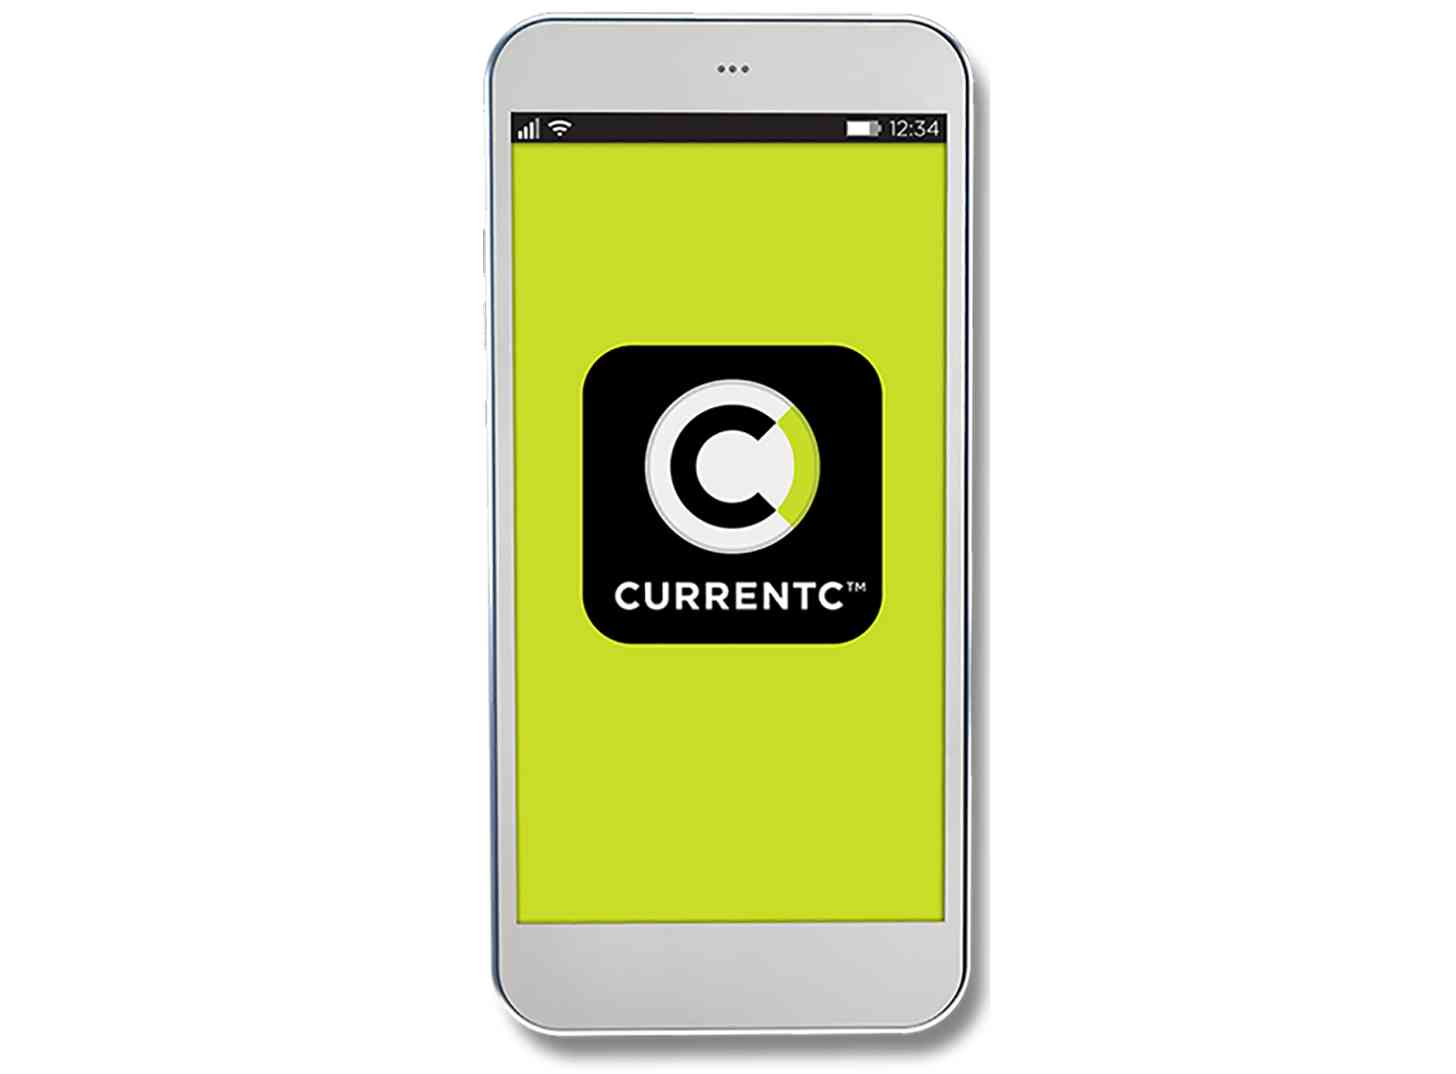 CurrentC MCX mobile payment service